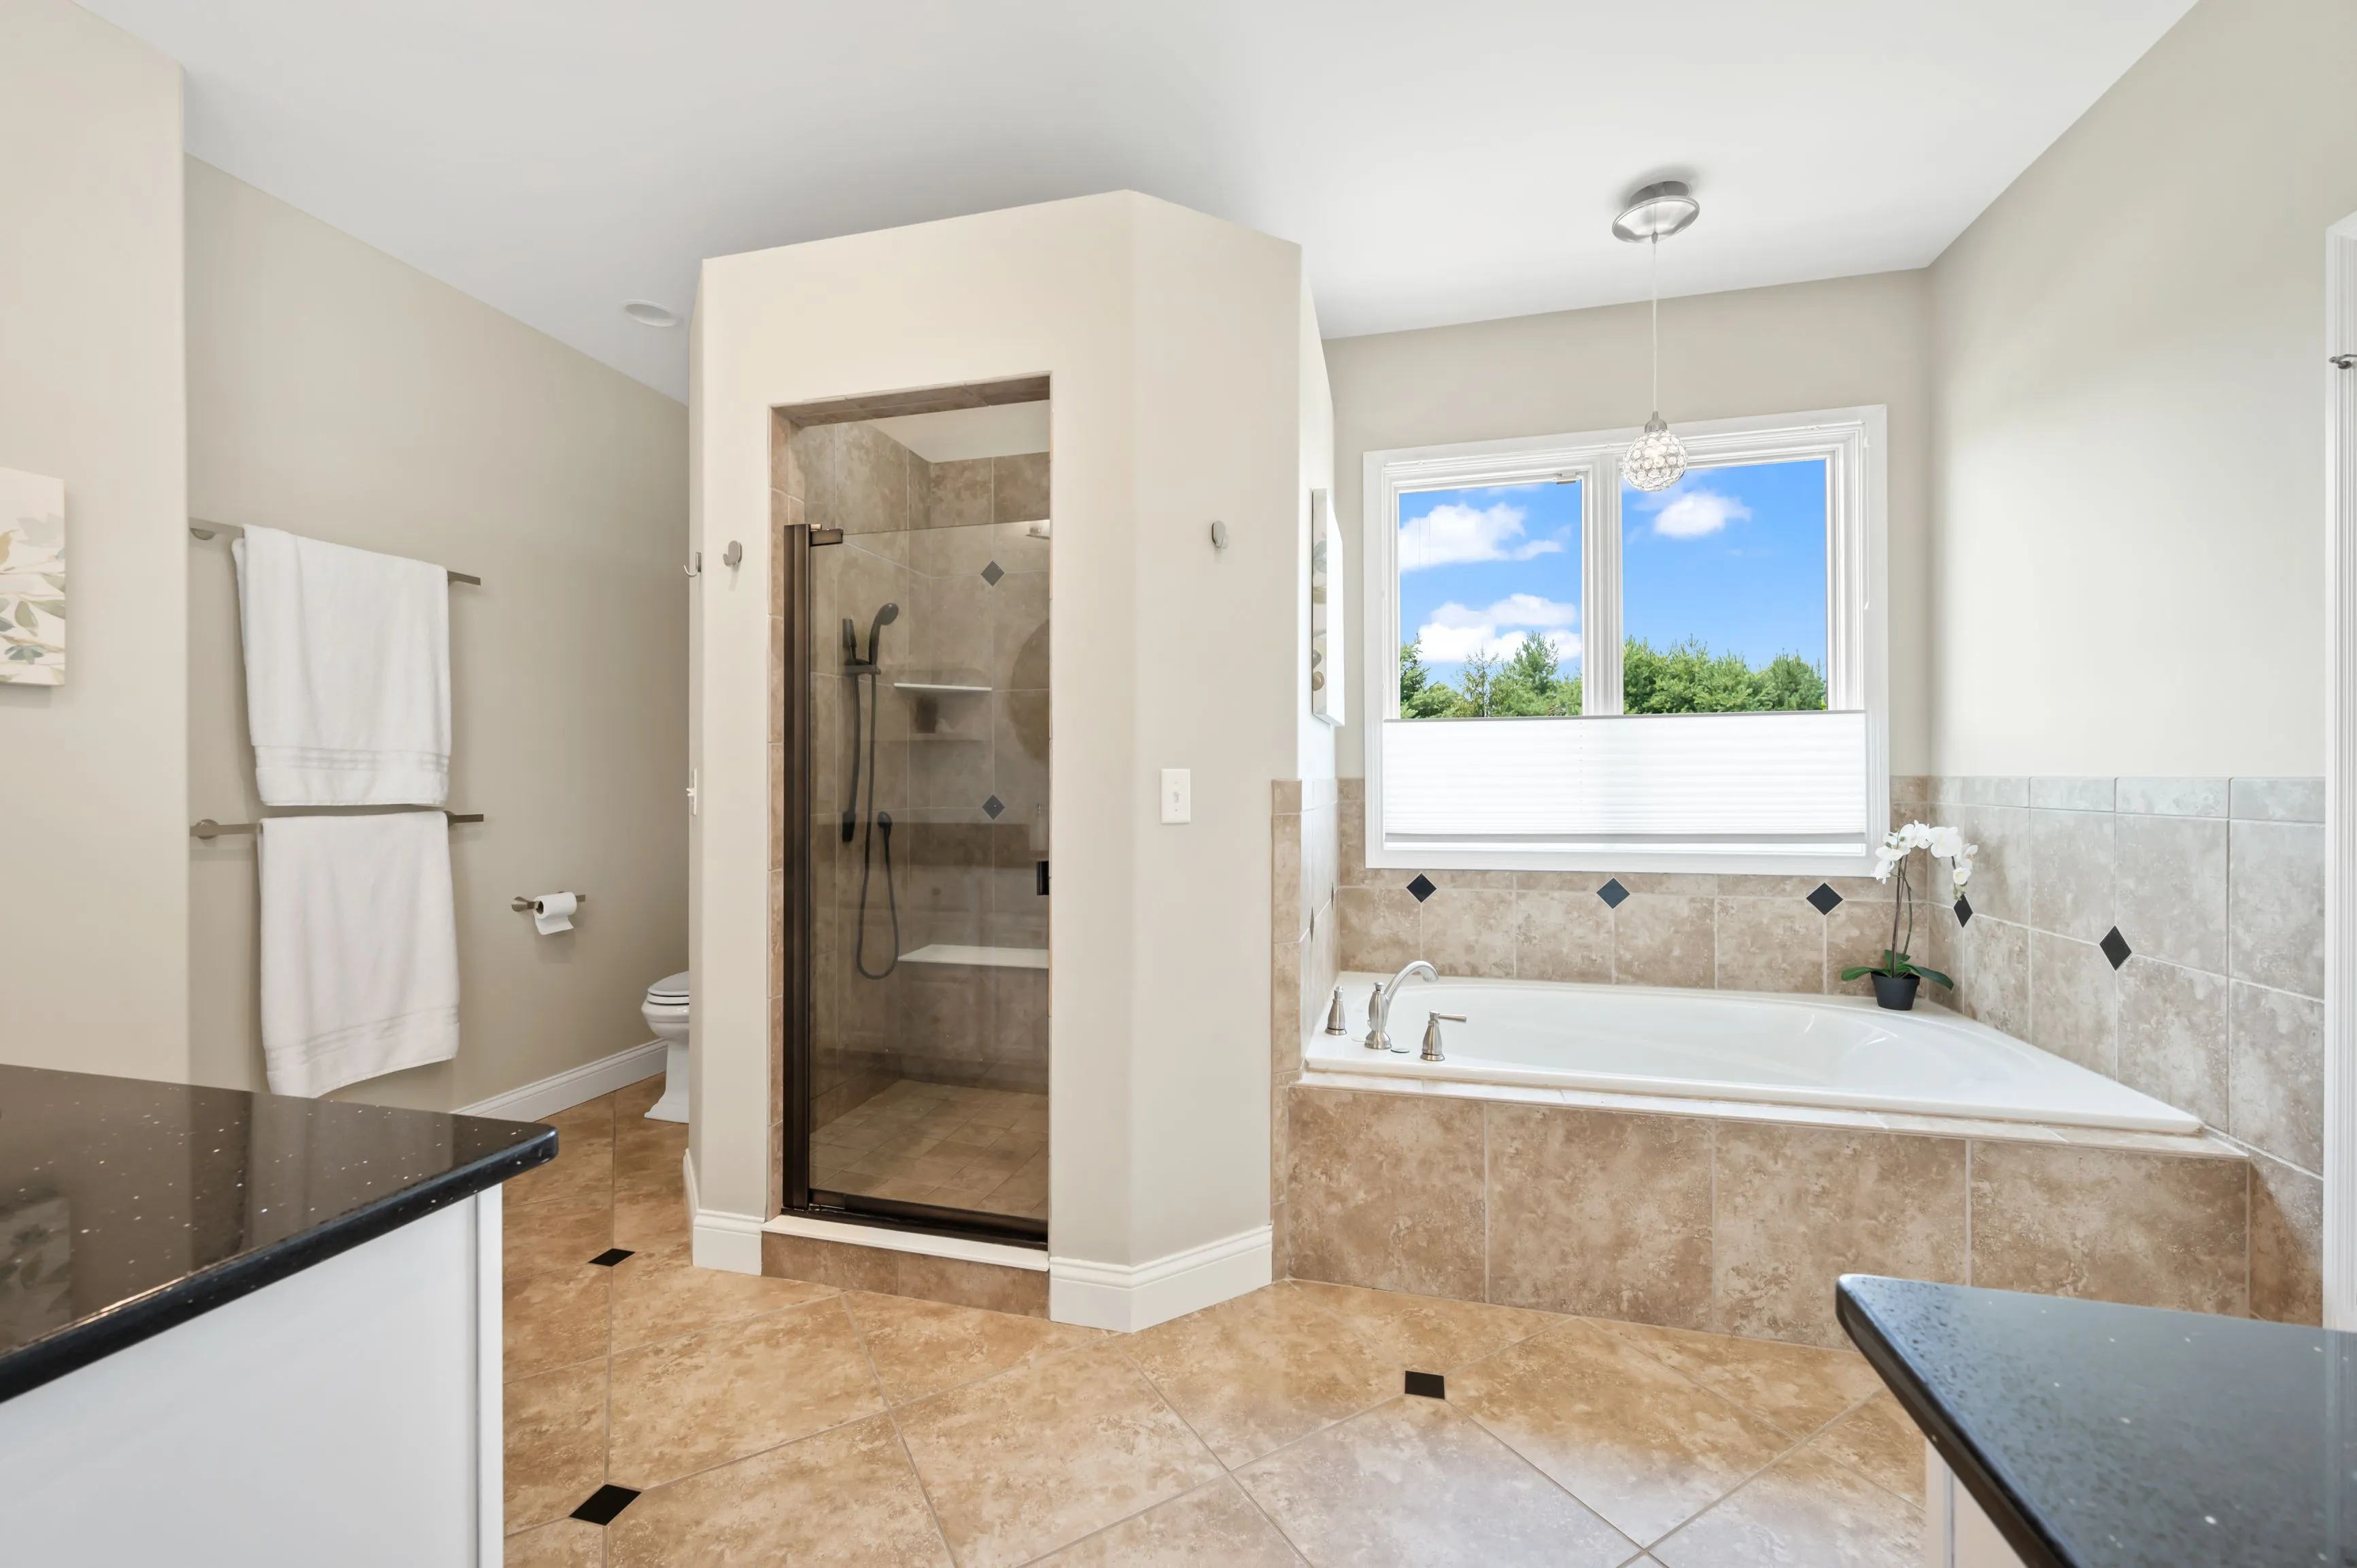 Bright modern bathroom with a shower cabin, bathtub, and a large window showing a sunny day outside.